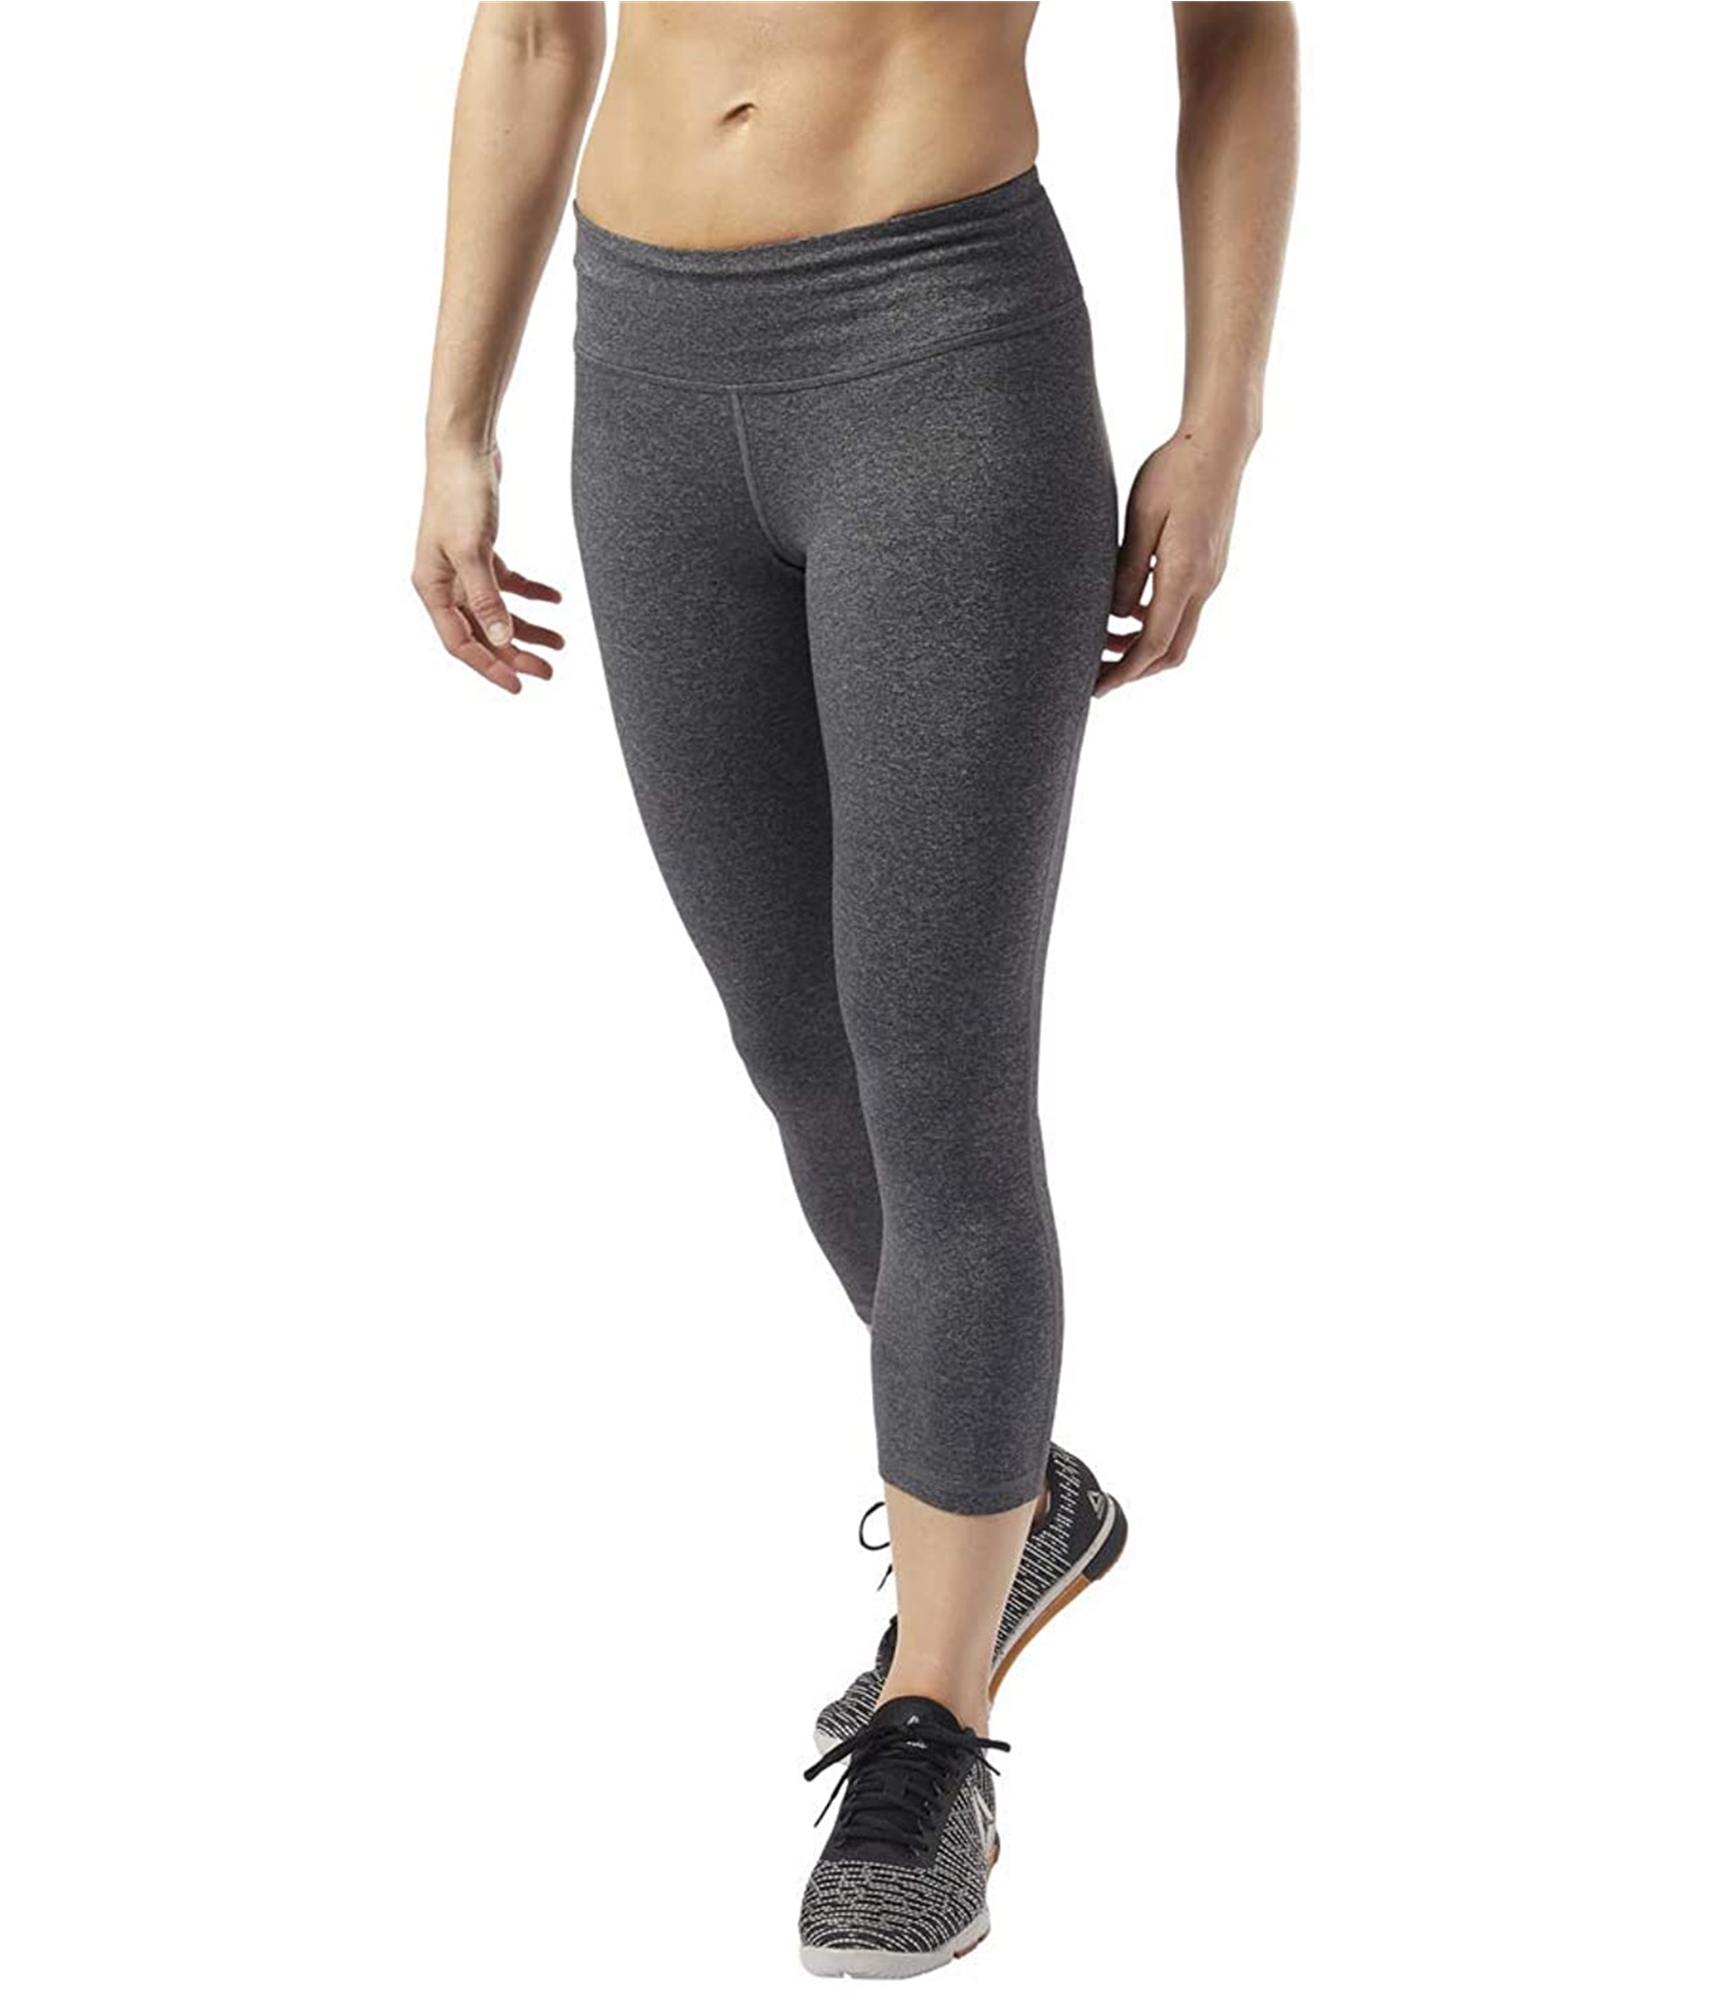 vokse op tuberkulose disk Buy a Womens Reebok OS Lux 3/4 Tight Compression Athletic Pants Online |  TagsWeekly.com